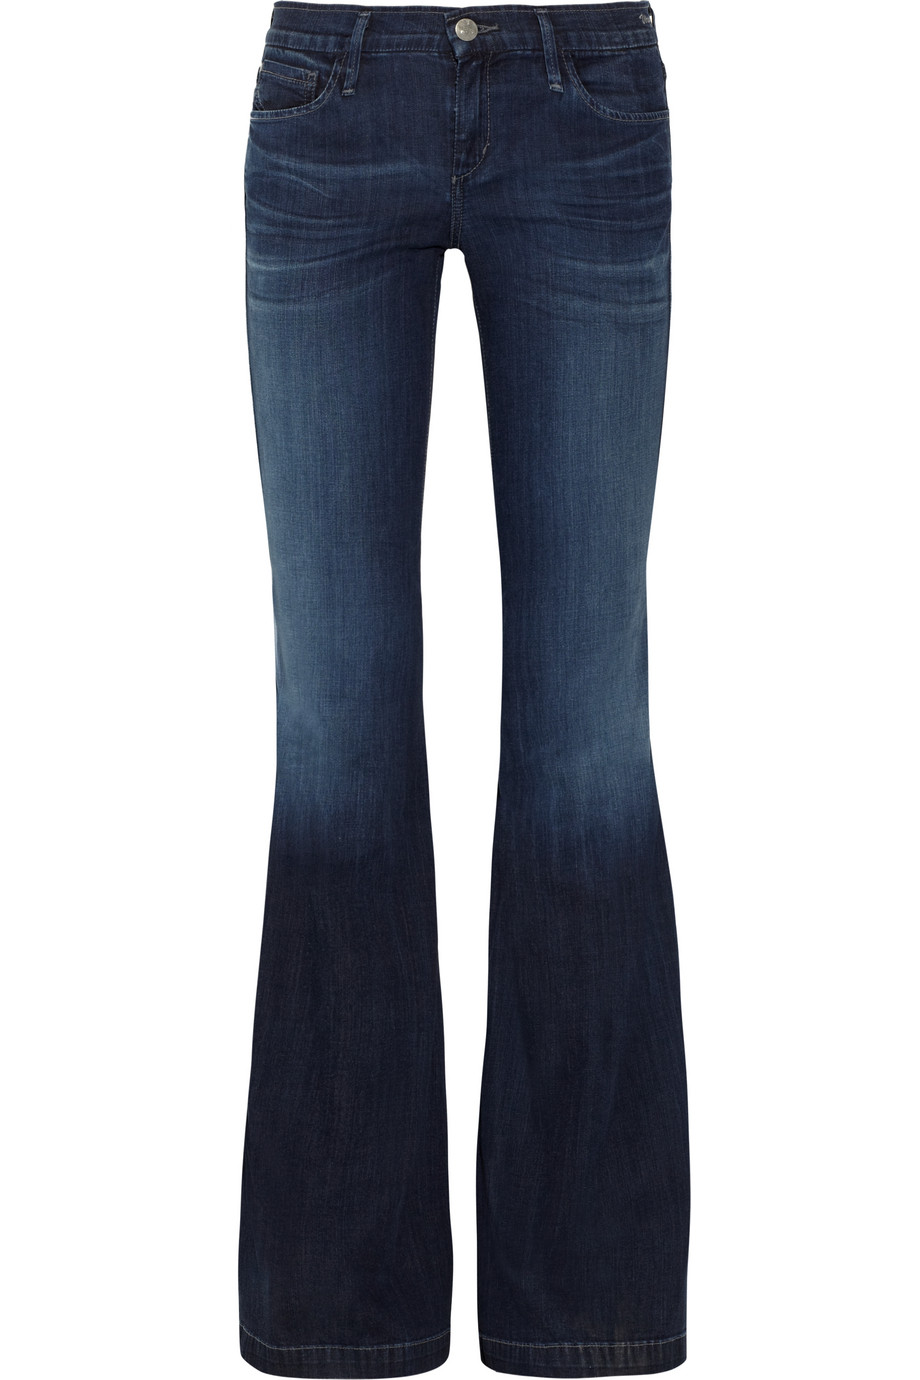 Goldsign Virginia Low-rise Flared Jeans in Mid Denim (Blue) - Lyst